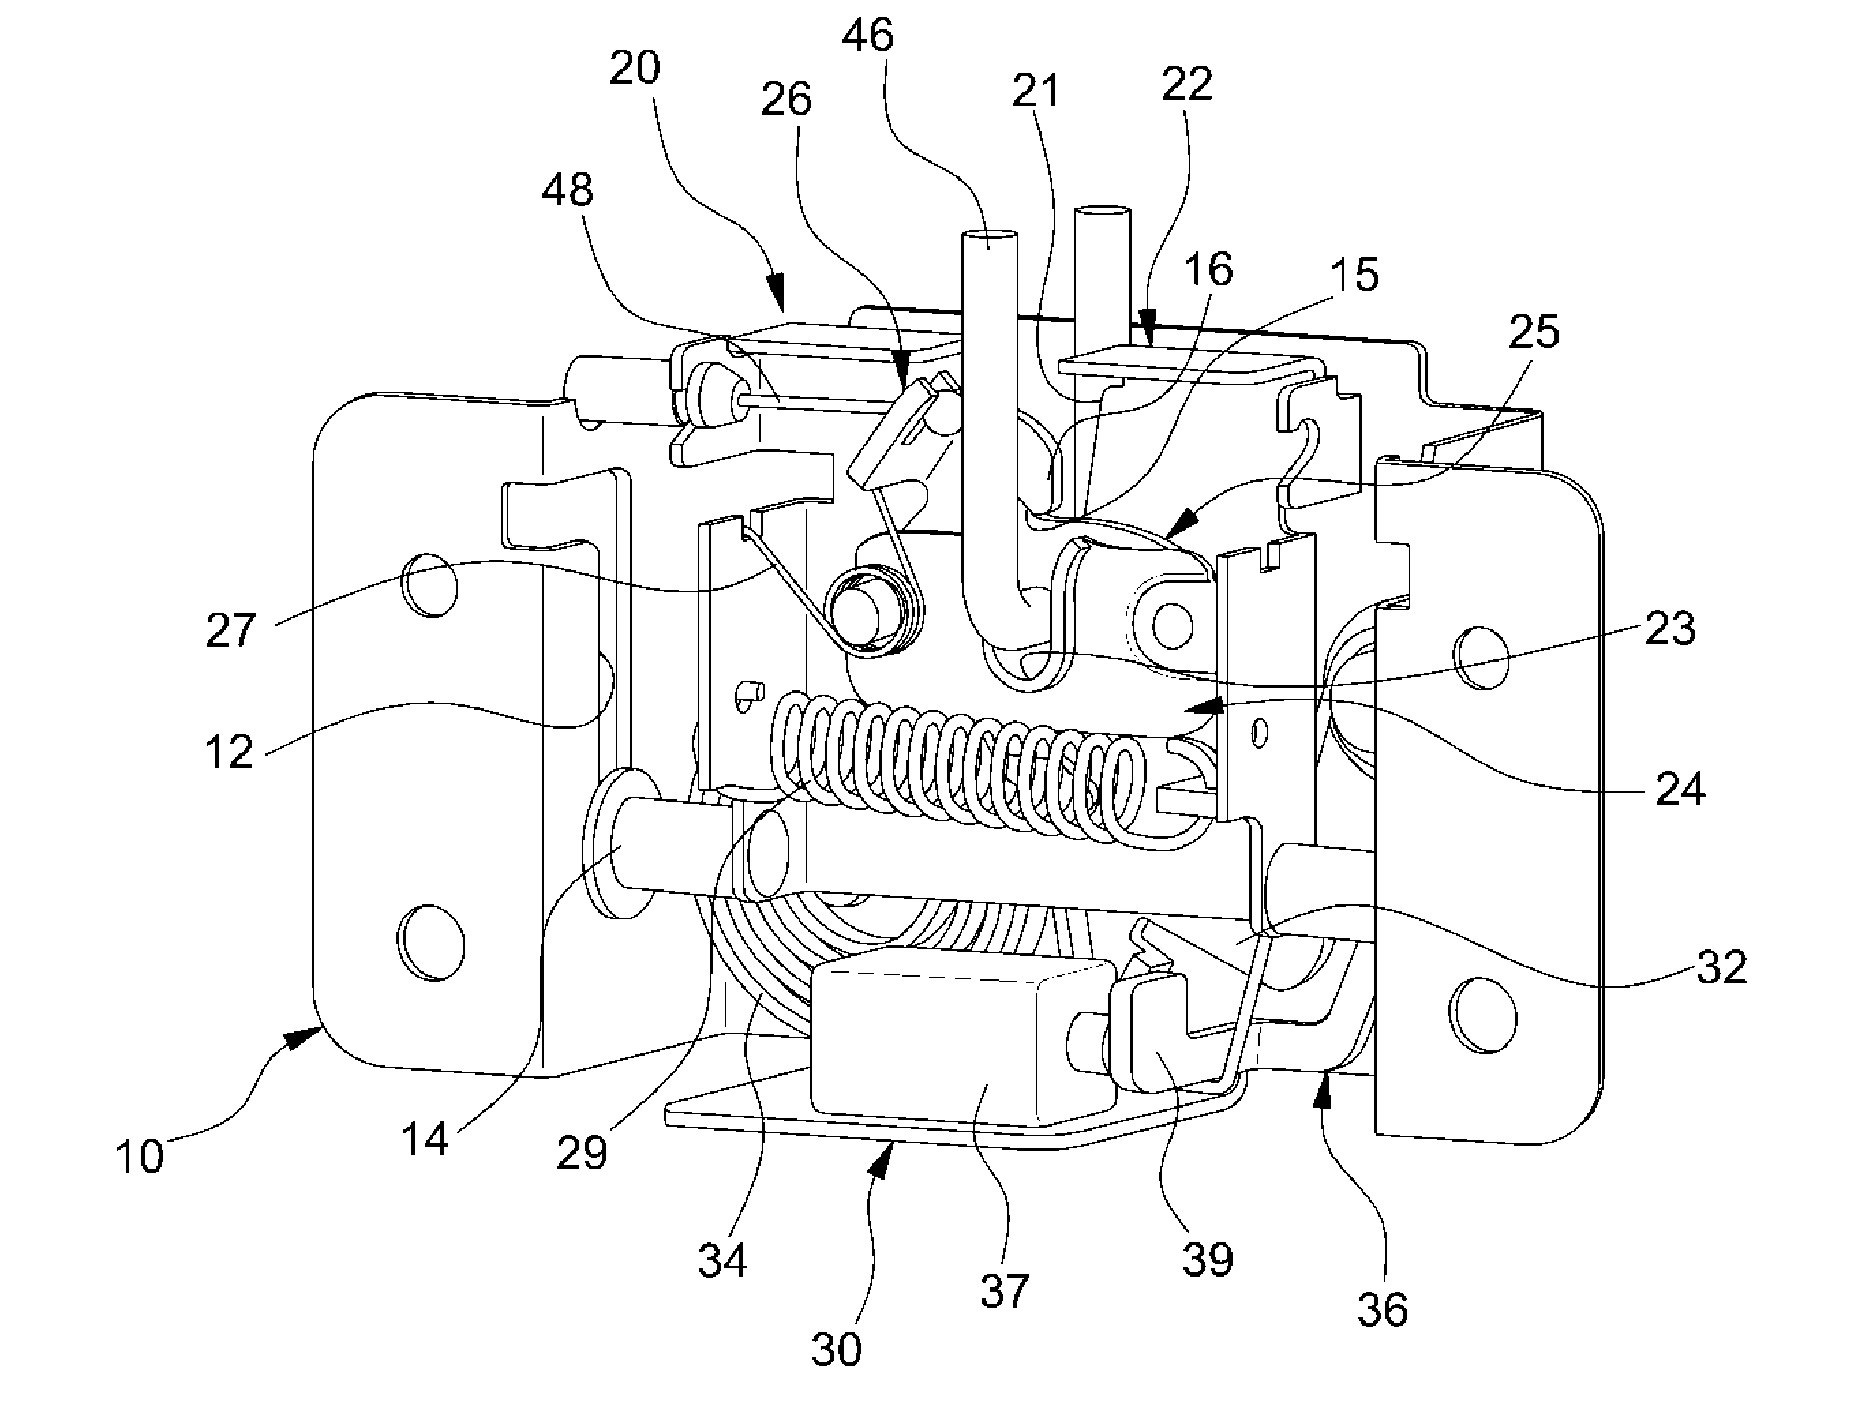 Active hood apparatus for vehicle